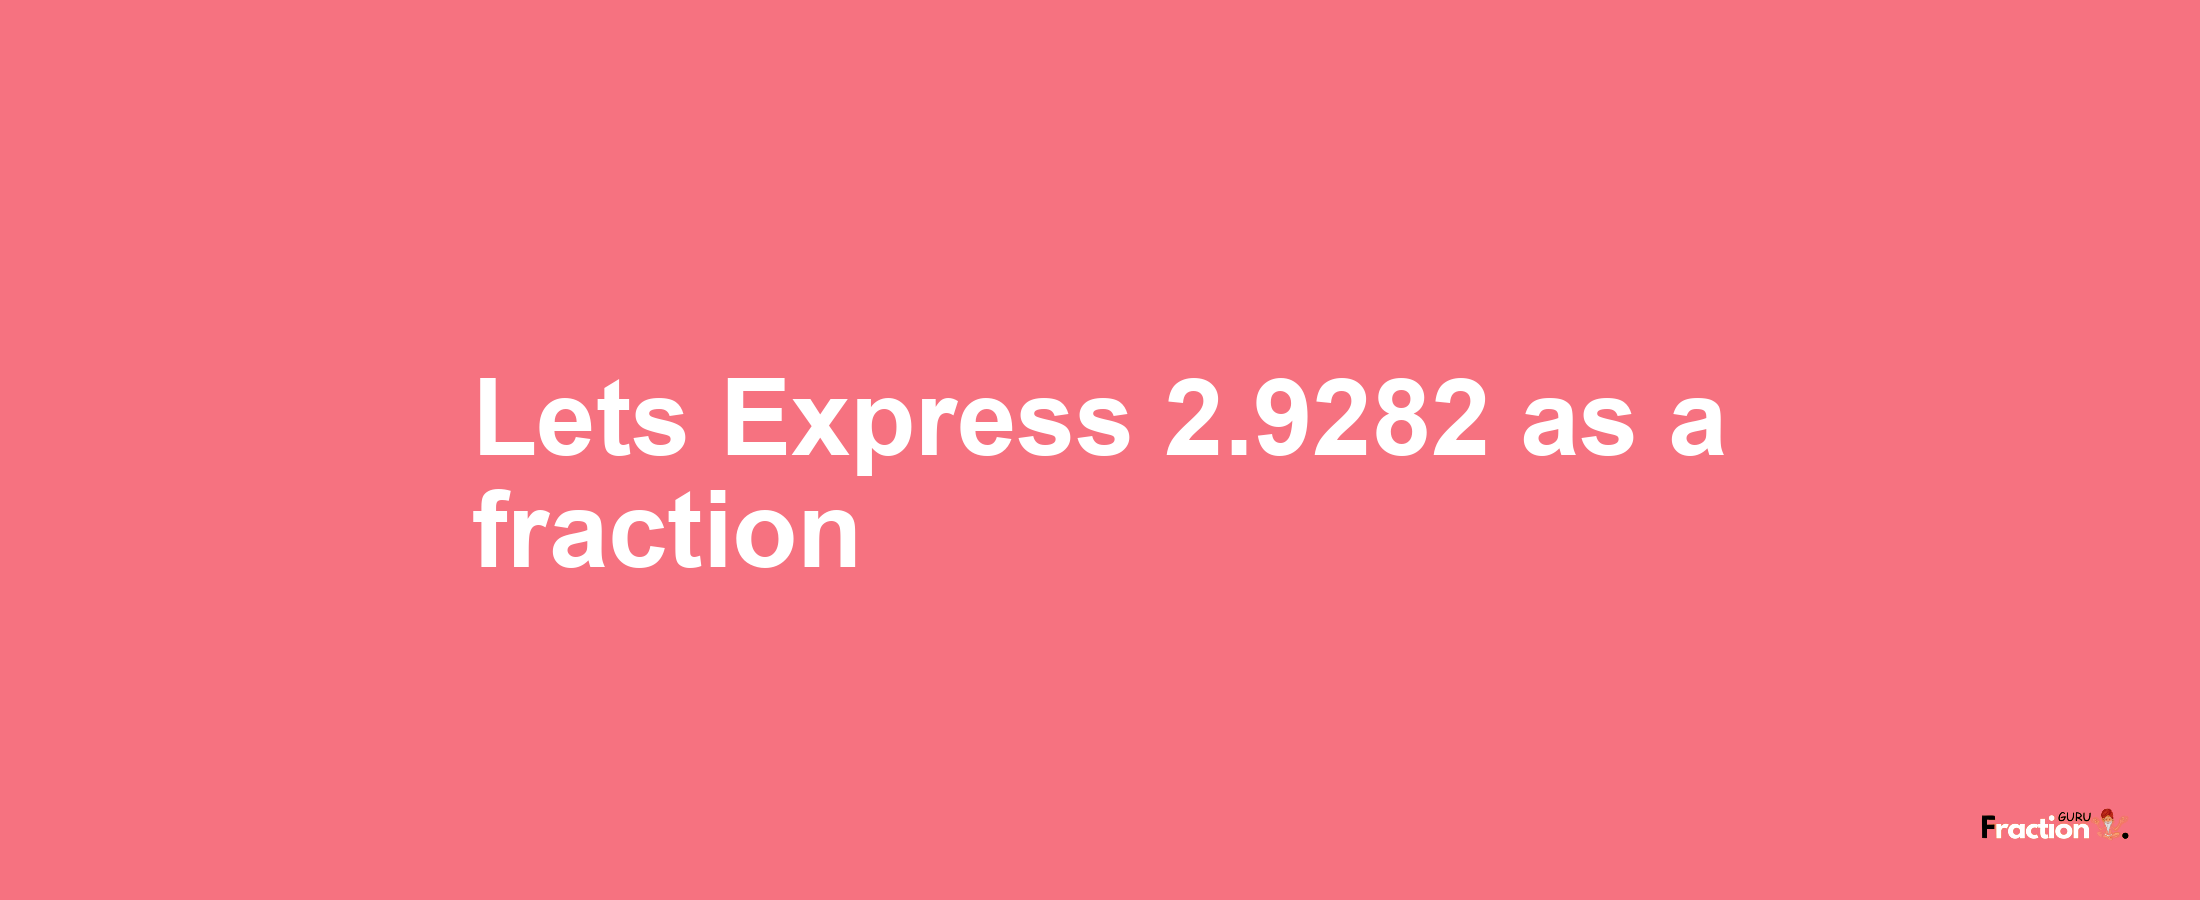 Lets Express 2.9282 as afraction